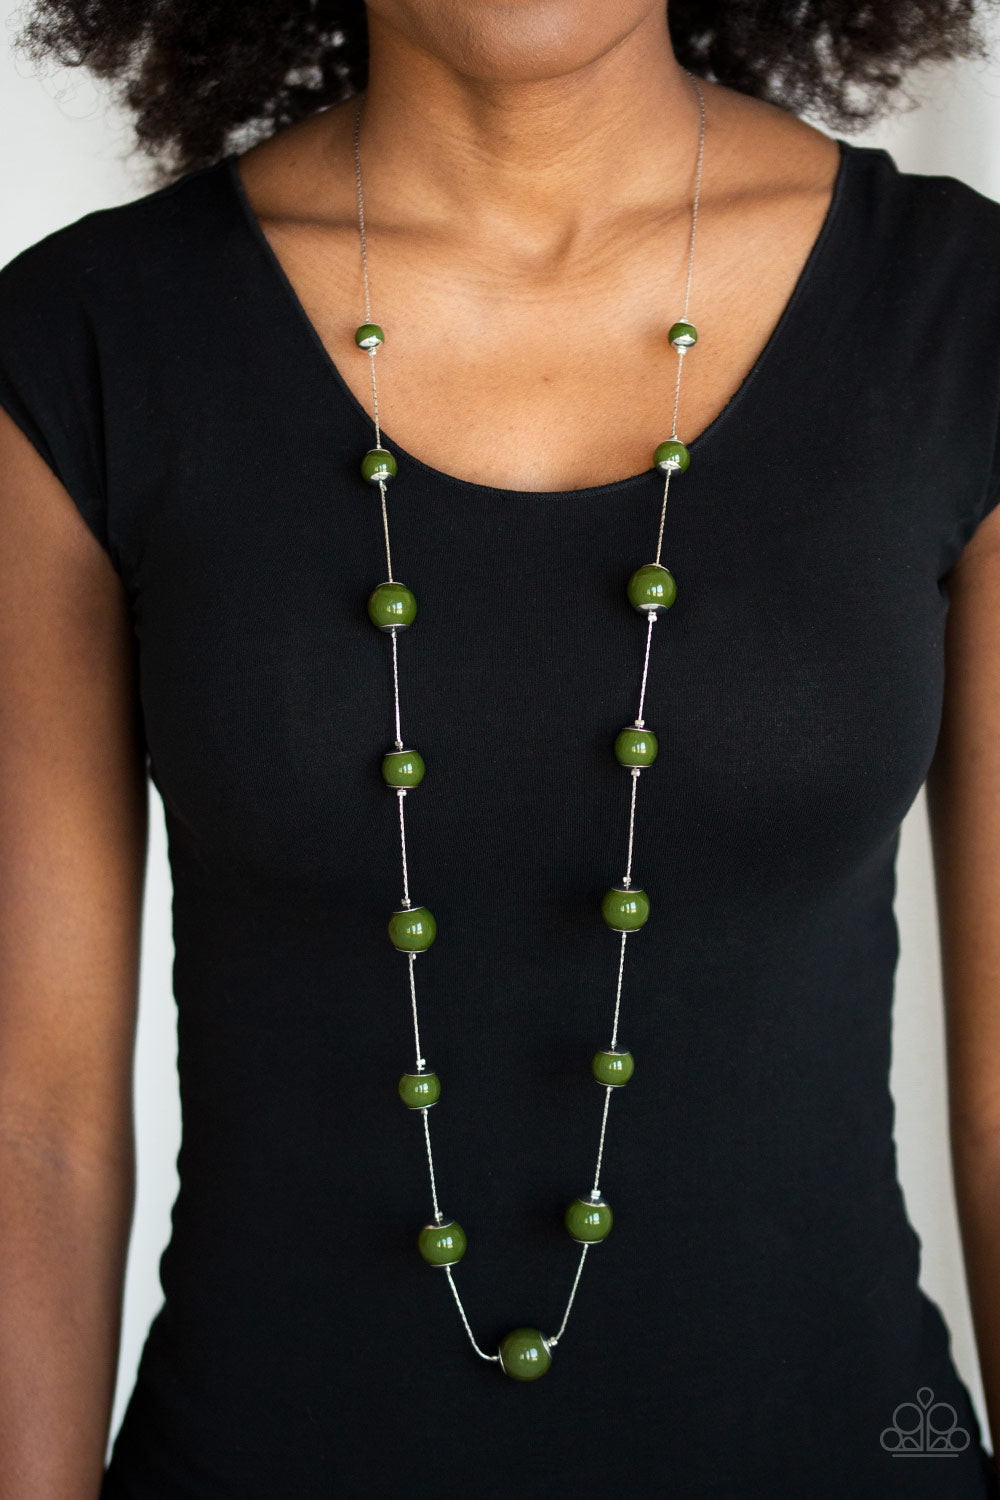 Paparazzi 5th Avenue Frenzy - Green Beads - Silver Chain Necklace and matching Earrings - $5 Jewelry with Ashley Swint